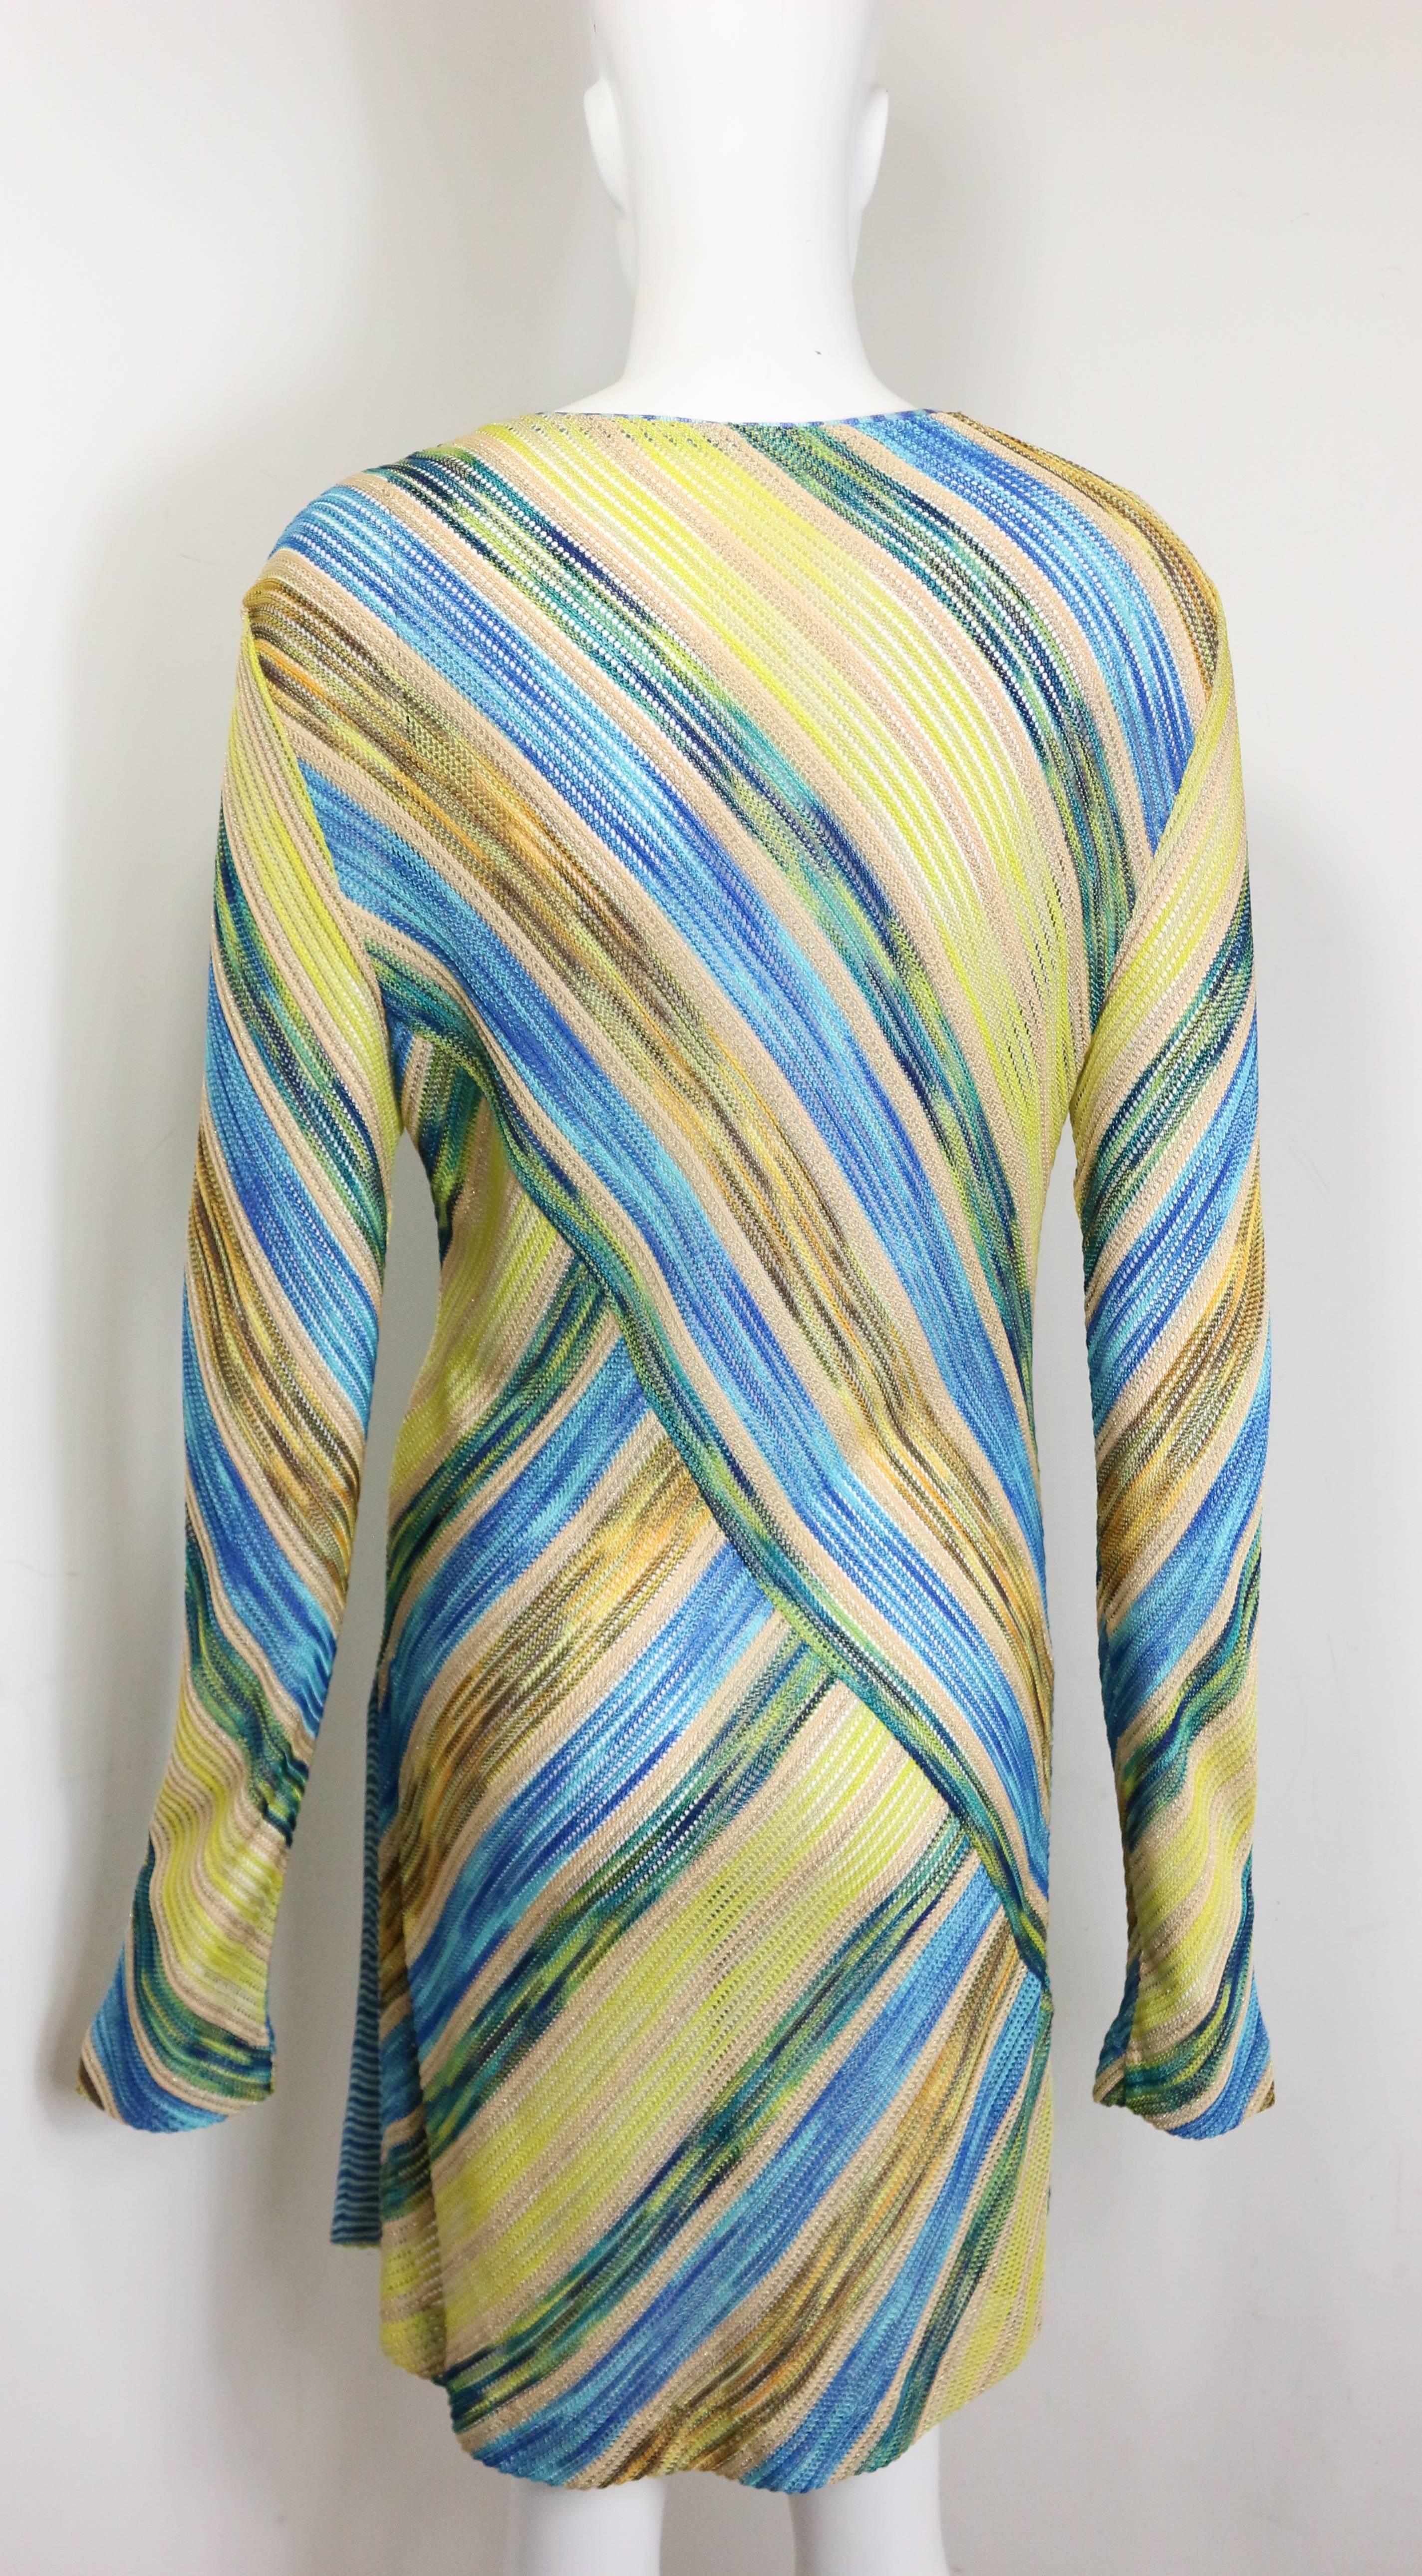 - Vintage 90s Missoni multi colour diagonal stripes knitted long sleeves dress. Featuring a round neckline and slit on both sides. A beautiful knitted dress with unique pattern. One of a kind! 

- Made in Italy. 

- 88% Viscose, 8% Rayon, 4%